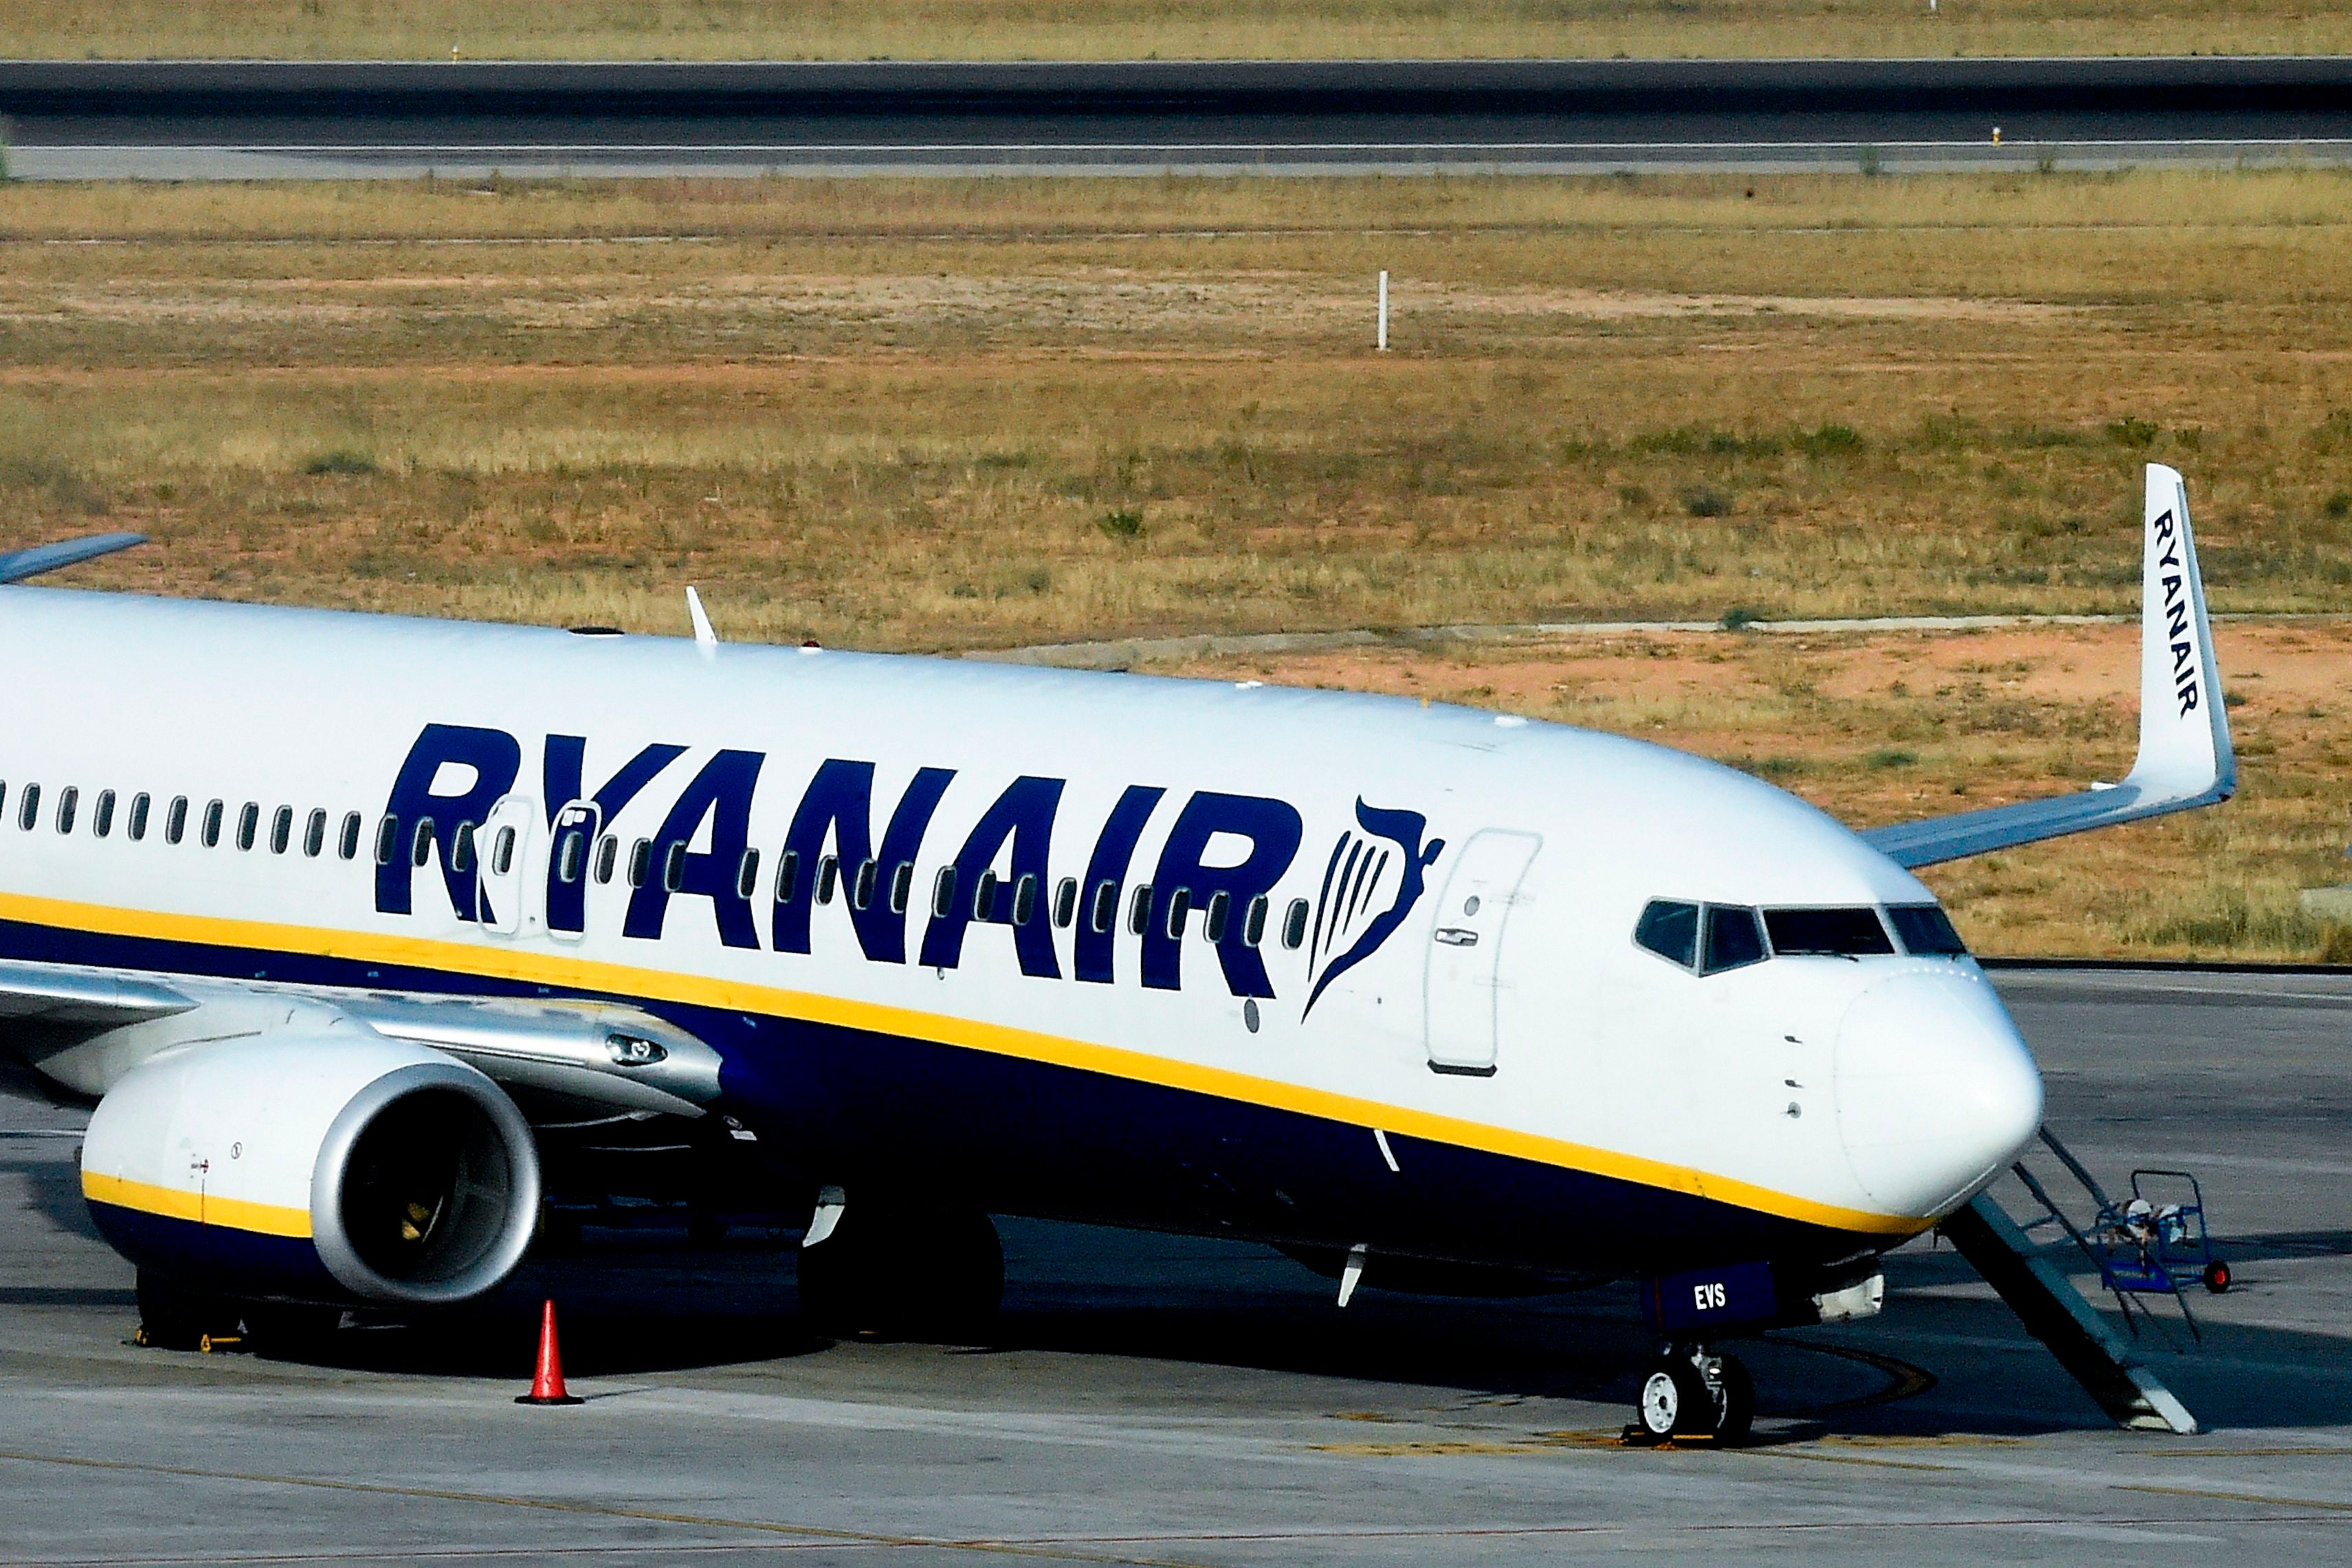 This is not the first such incident of disruptive passengers to have taken place on a Ryanair flight this summer